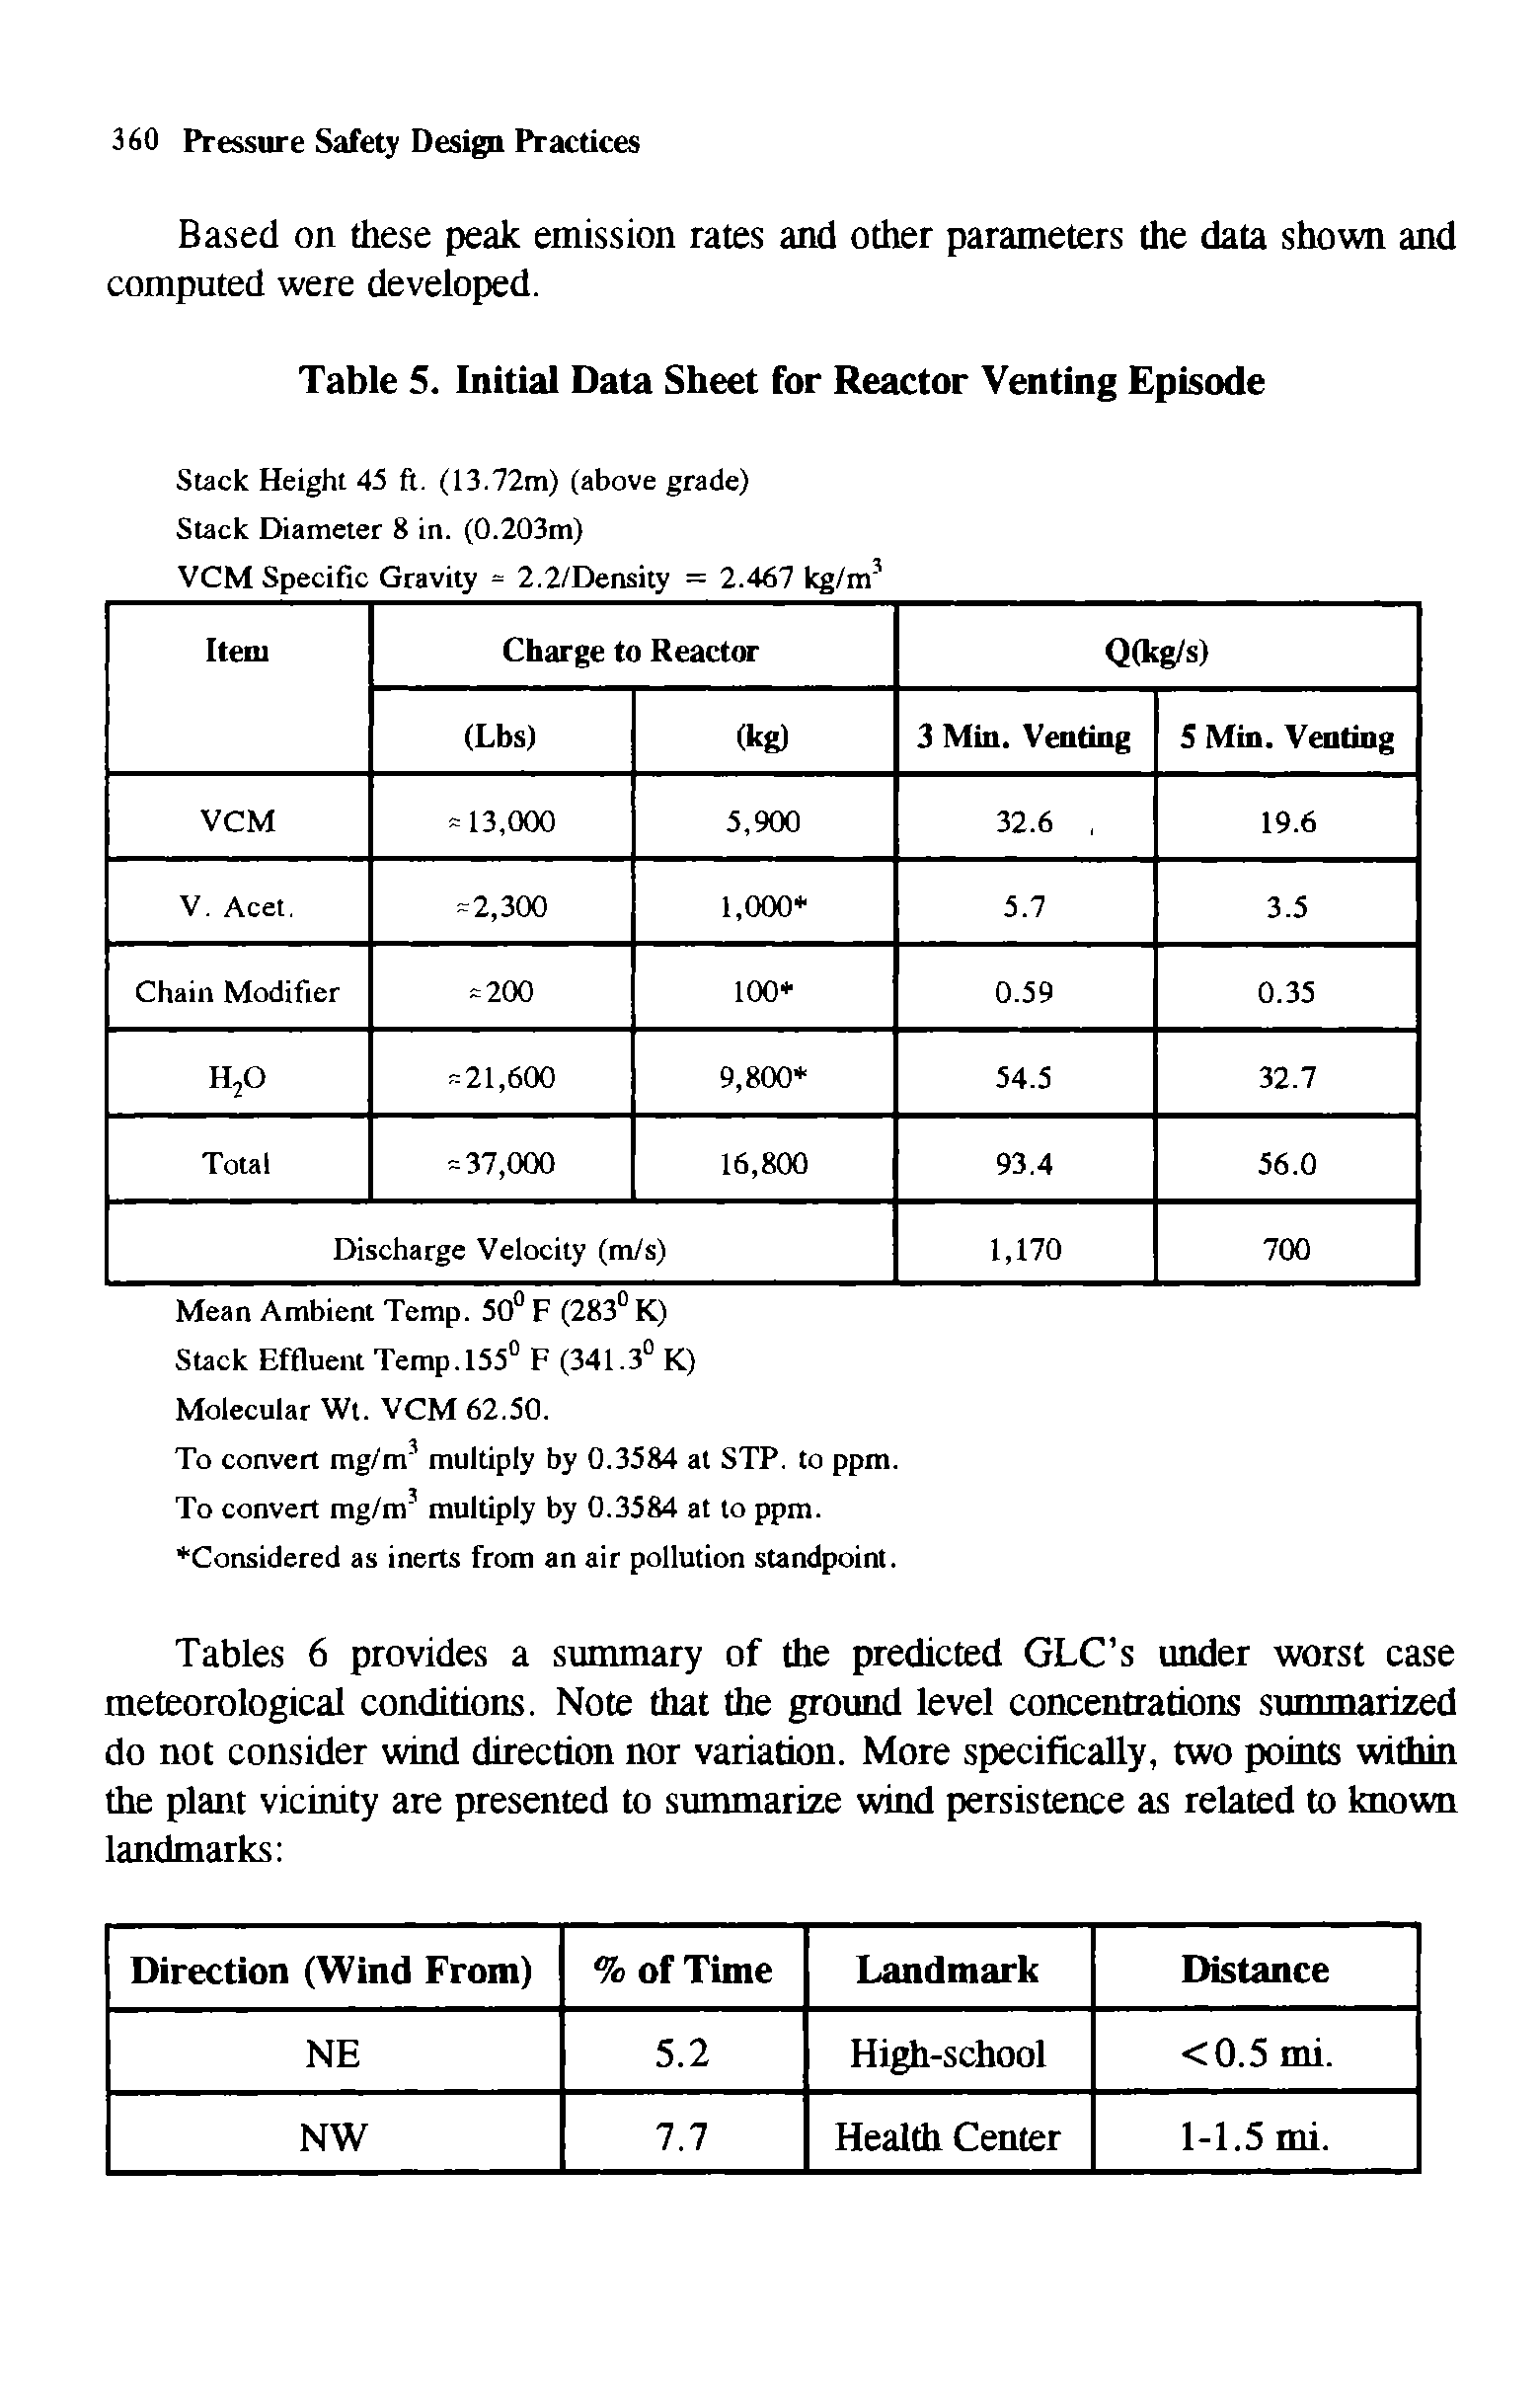 Tables 6 provides a summary of the predicted GLCs under worst case meteorological conditions. Note that the ground level concentrations summarized do not consider wind direction nor variation. More specifically, two points within the plant vicinity are presented to summarize wind persistence as related to known landmarks ...